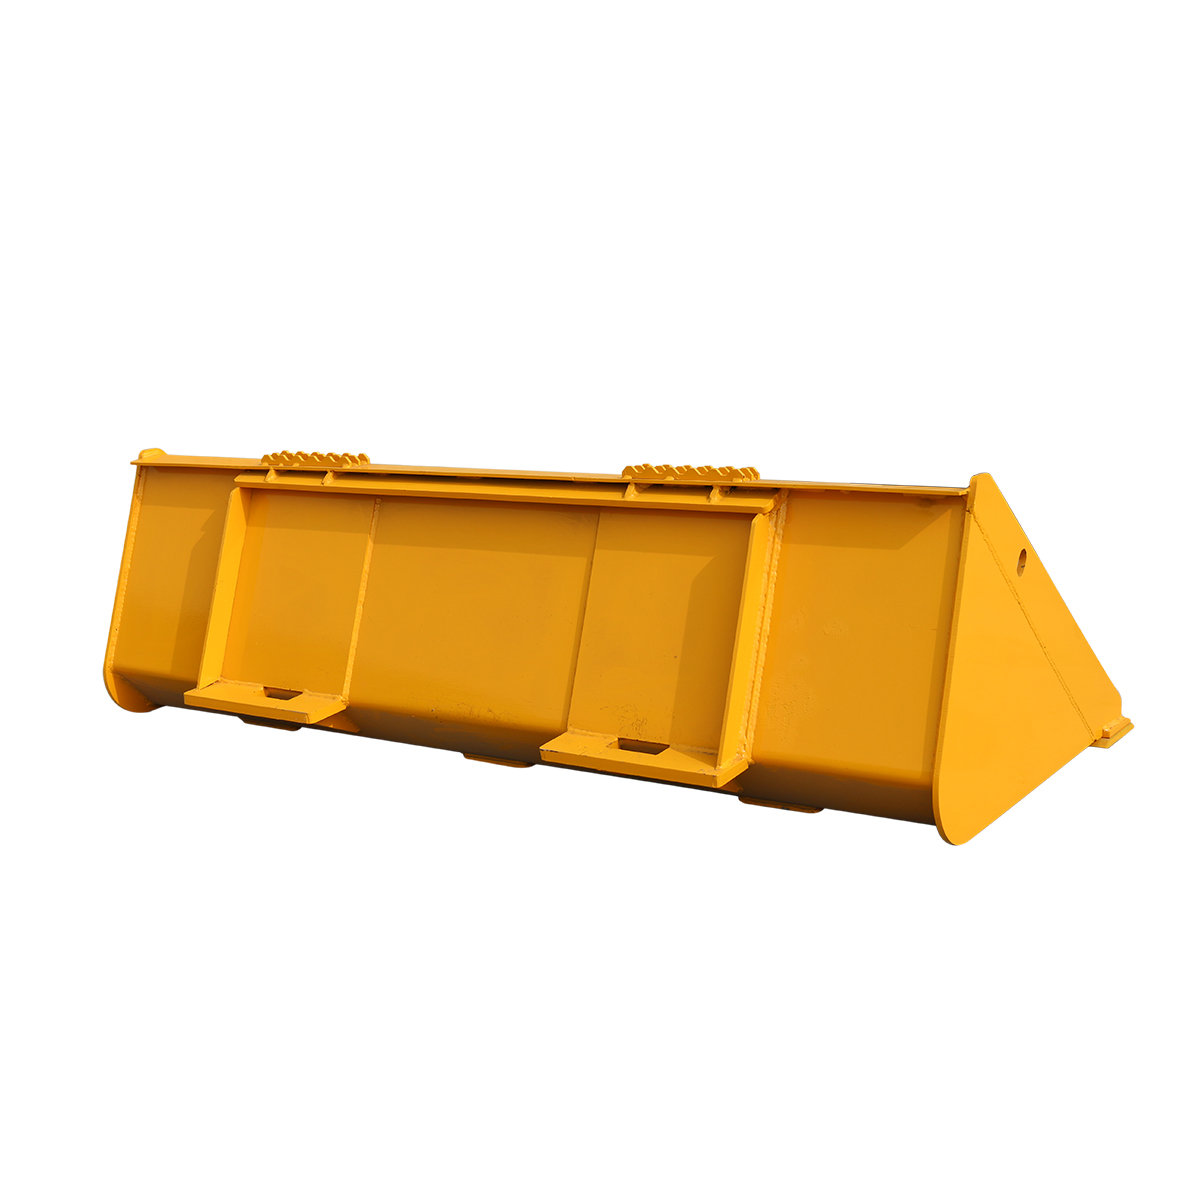 Factory 66 72 84 Inches Skid Steer Loader Attachments Standard Bucket in Stock